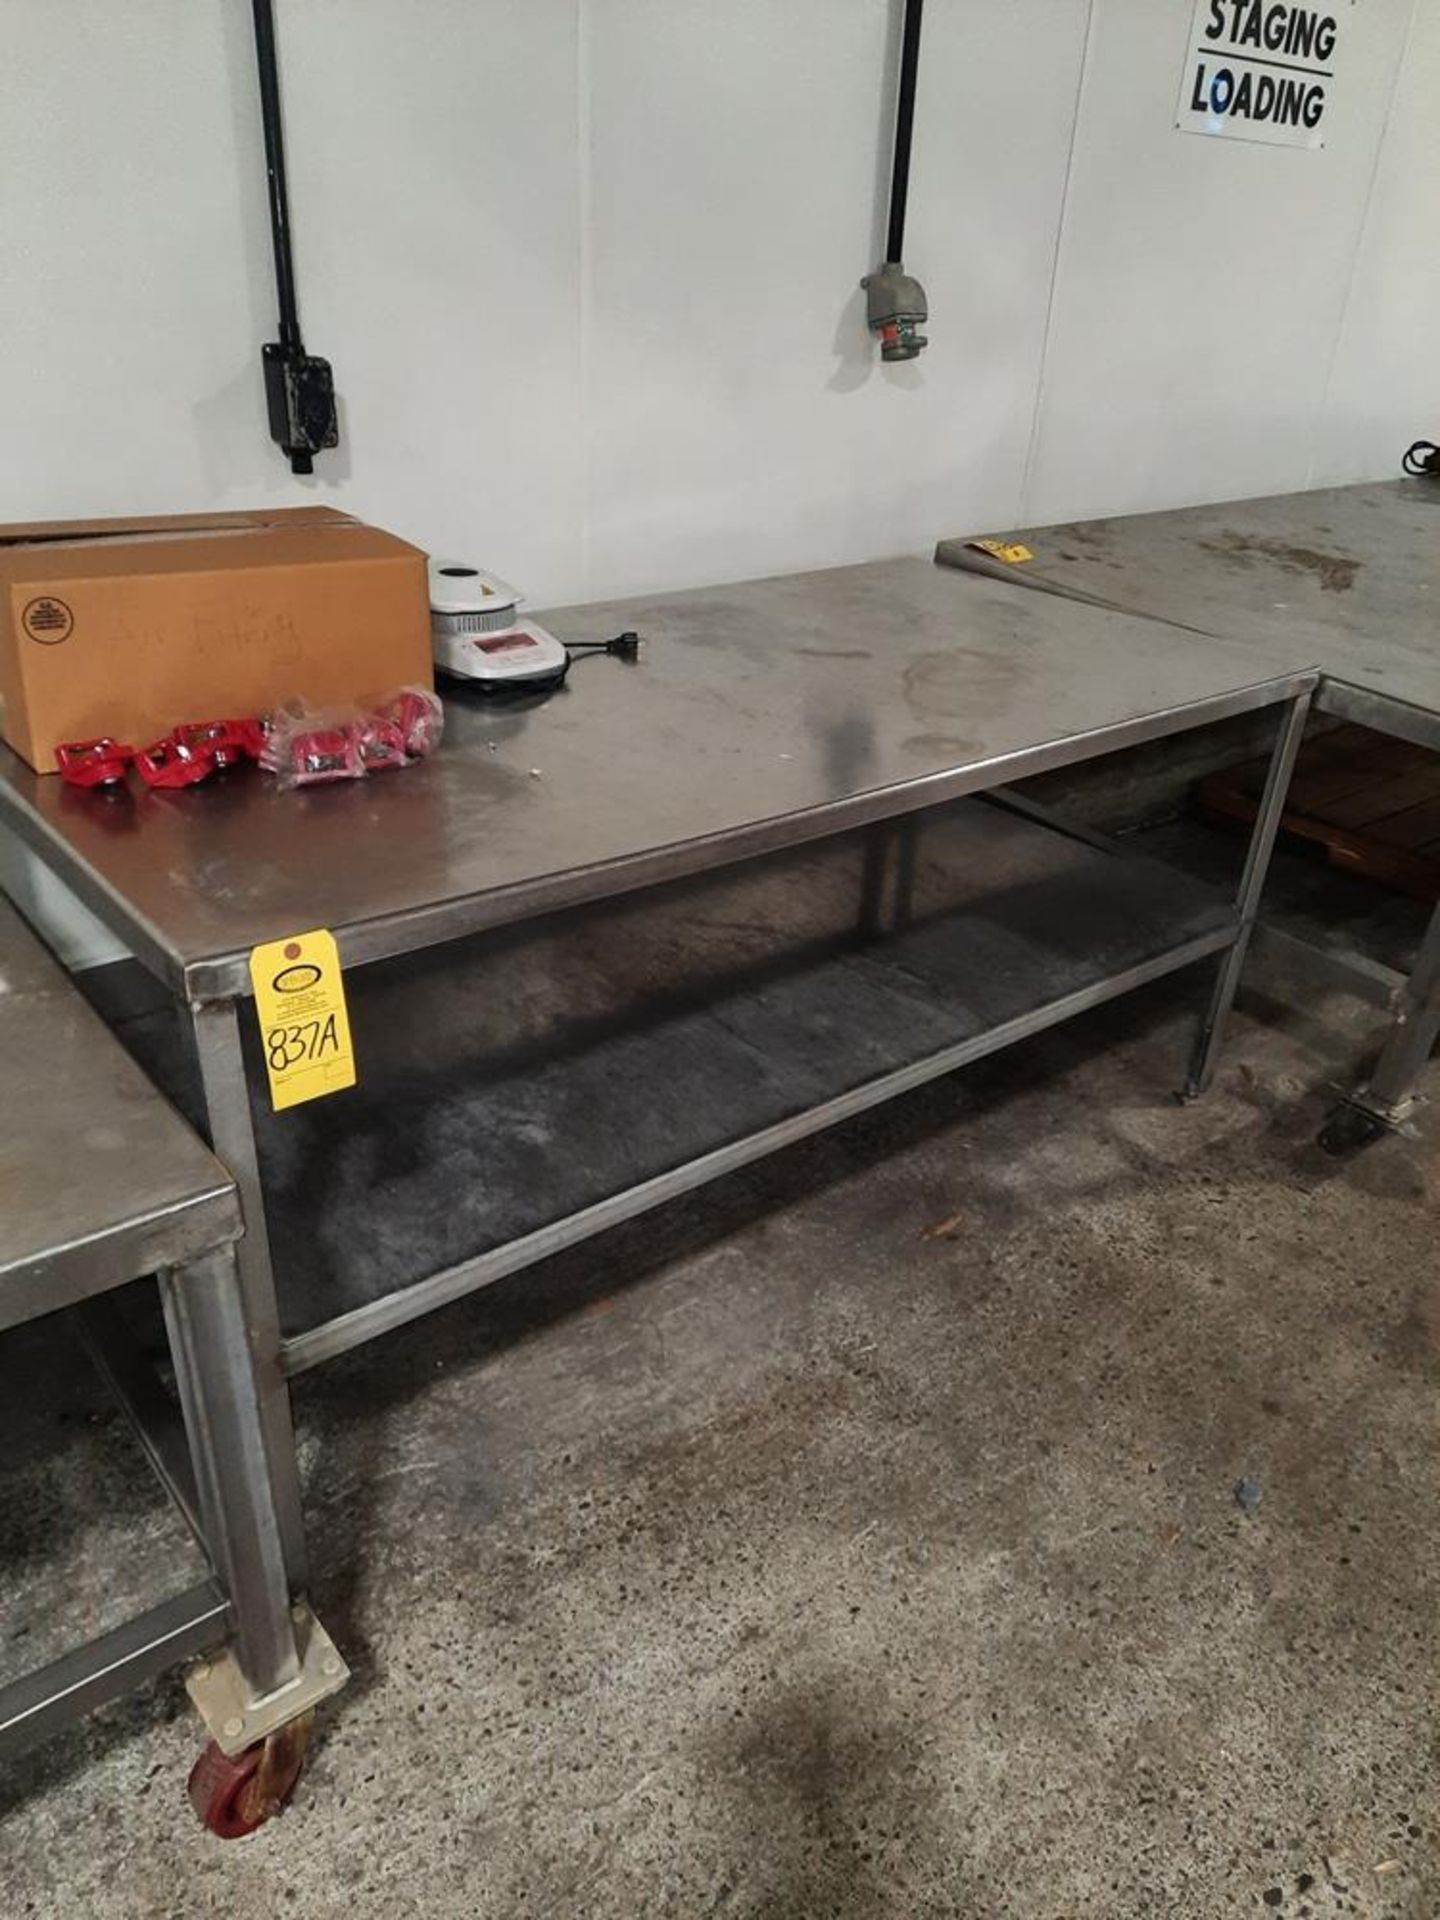 Stainless Steel Table, 3' W X 6' L X 33' T: Required Loading Fee $75.00, Rigger-Norm Pavlish,